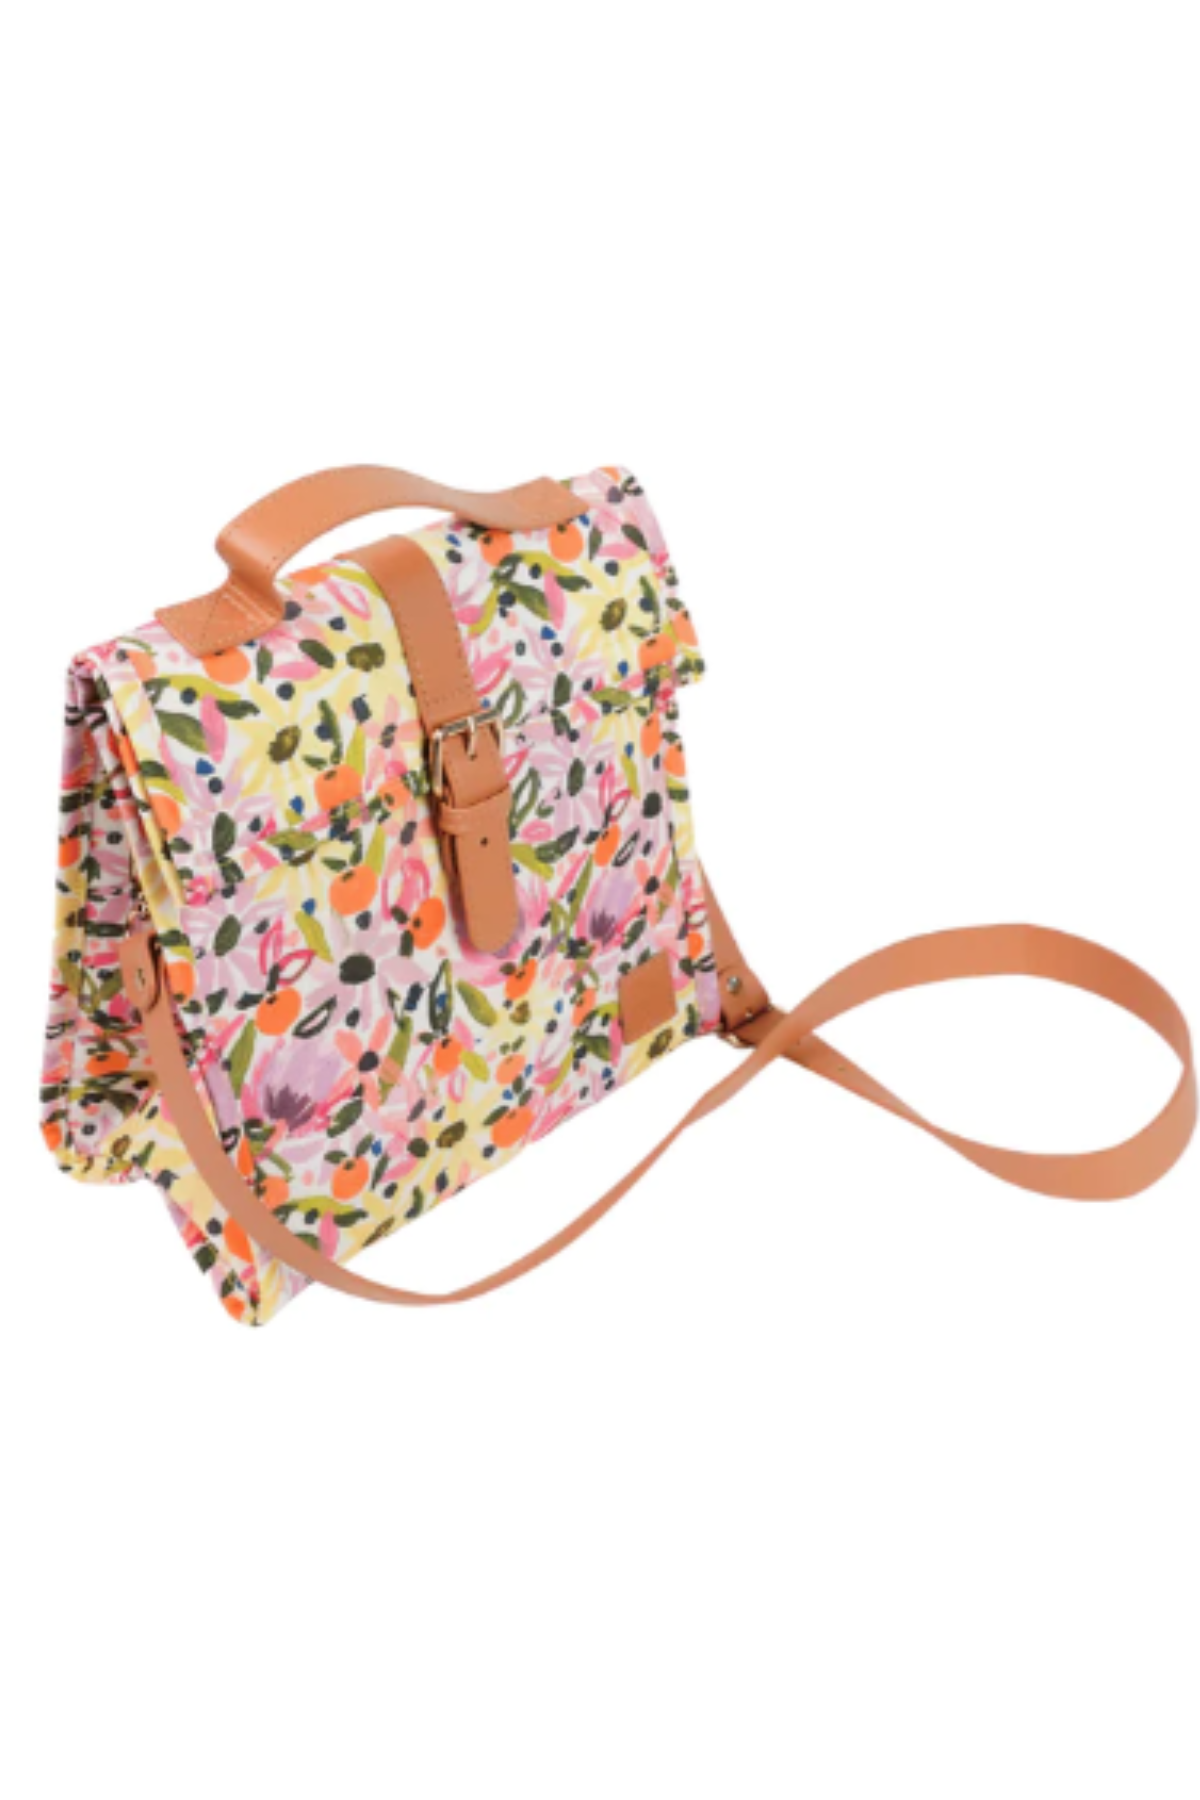 Wildflower Lunch Satchel by The Somewhere Co